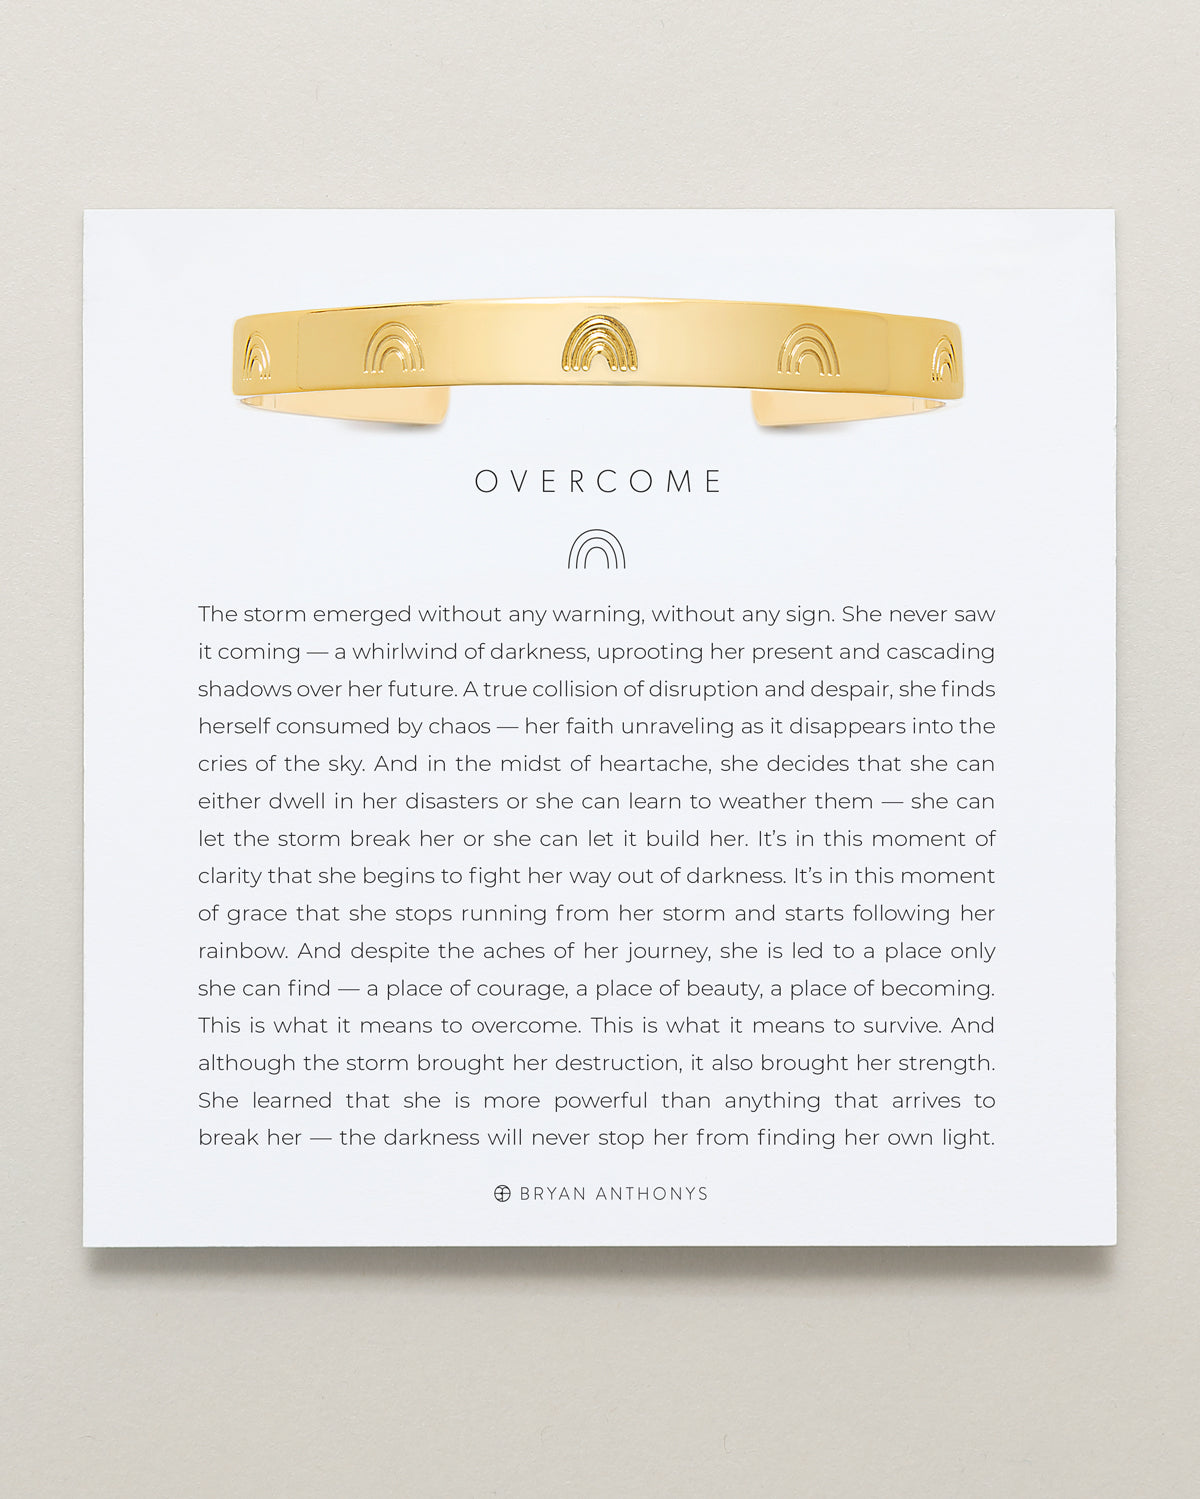 Bryan Anthonys Overcome Gold Engraved Cuff On Card